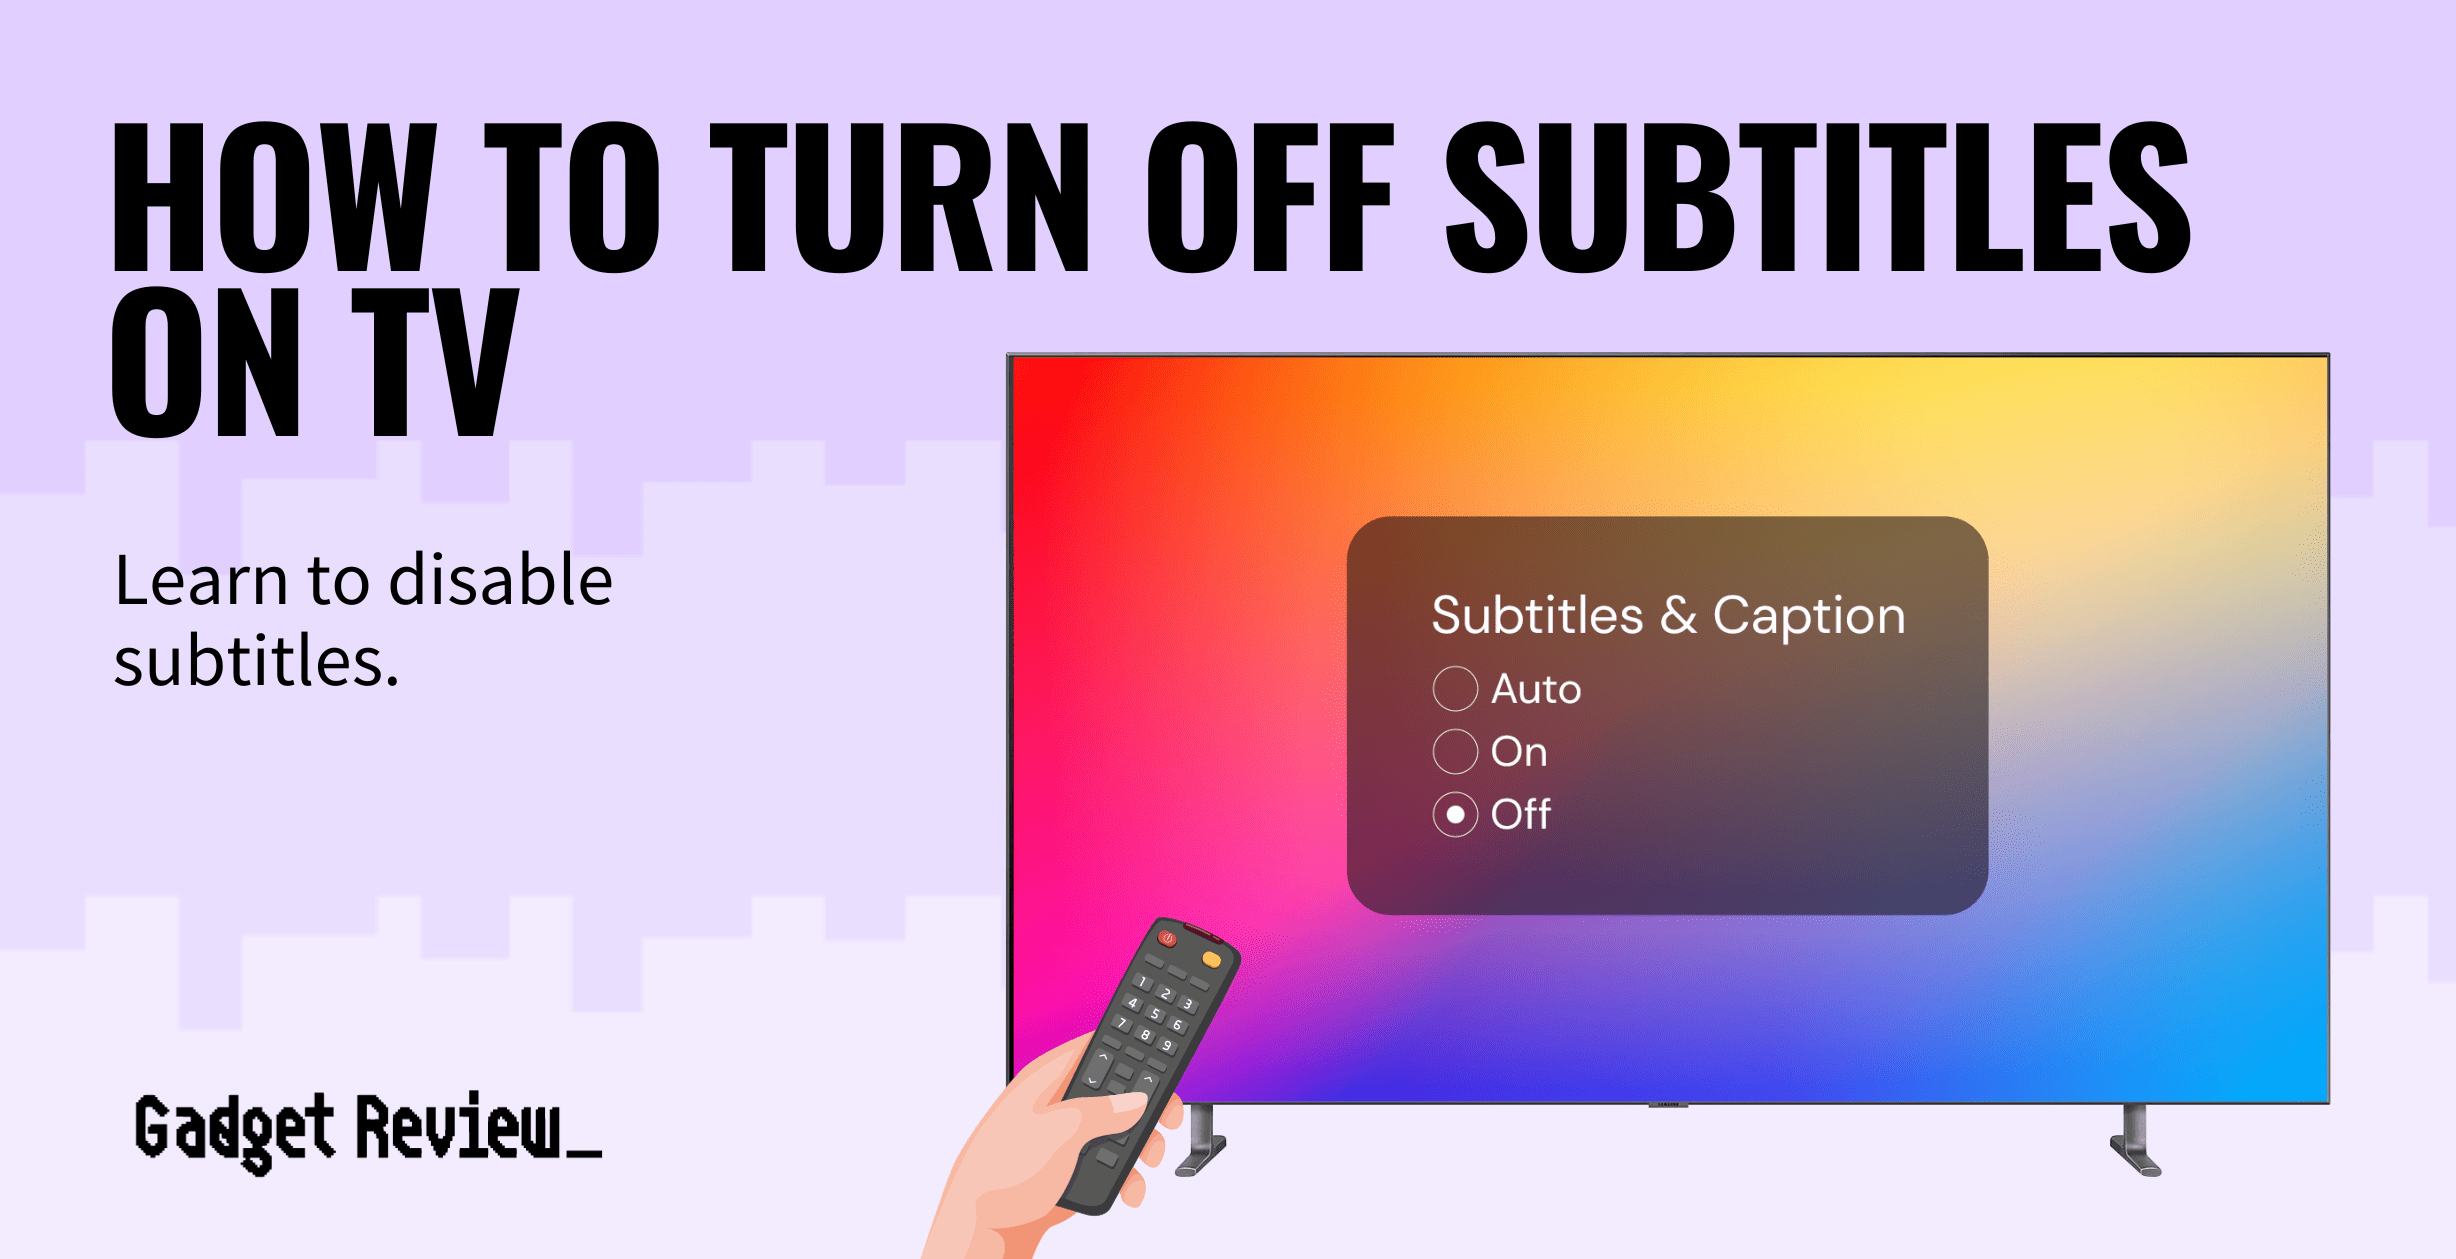 how to turn off subtitles on tv featured image and the topic’s overarching details